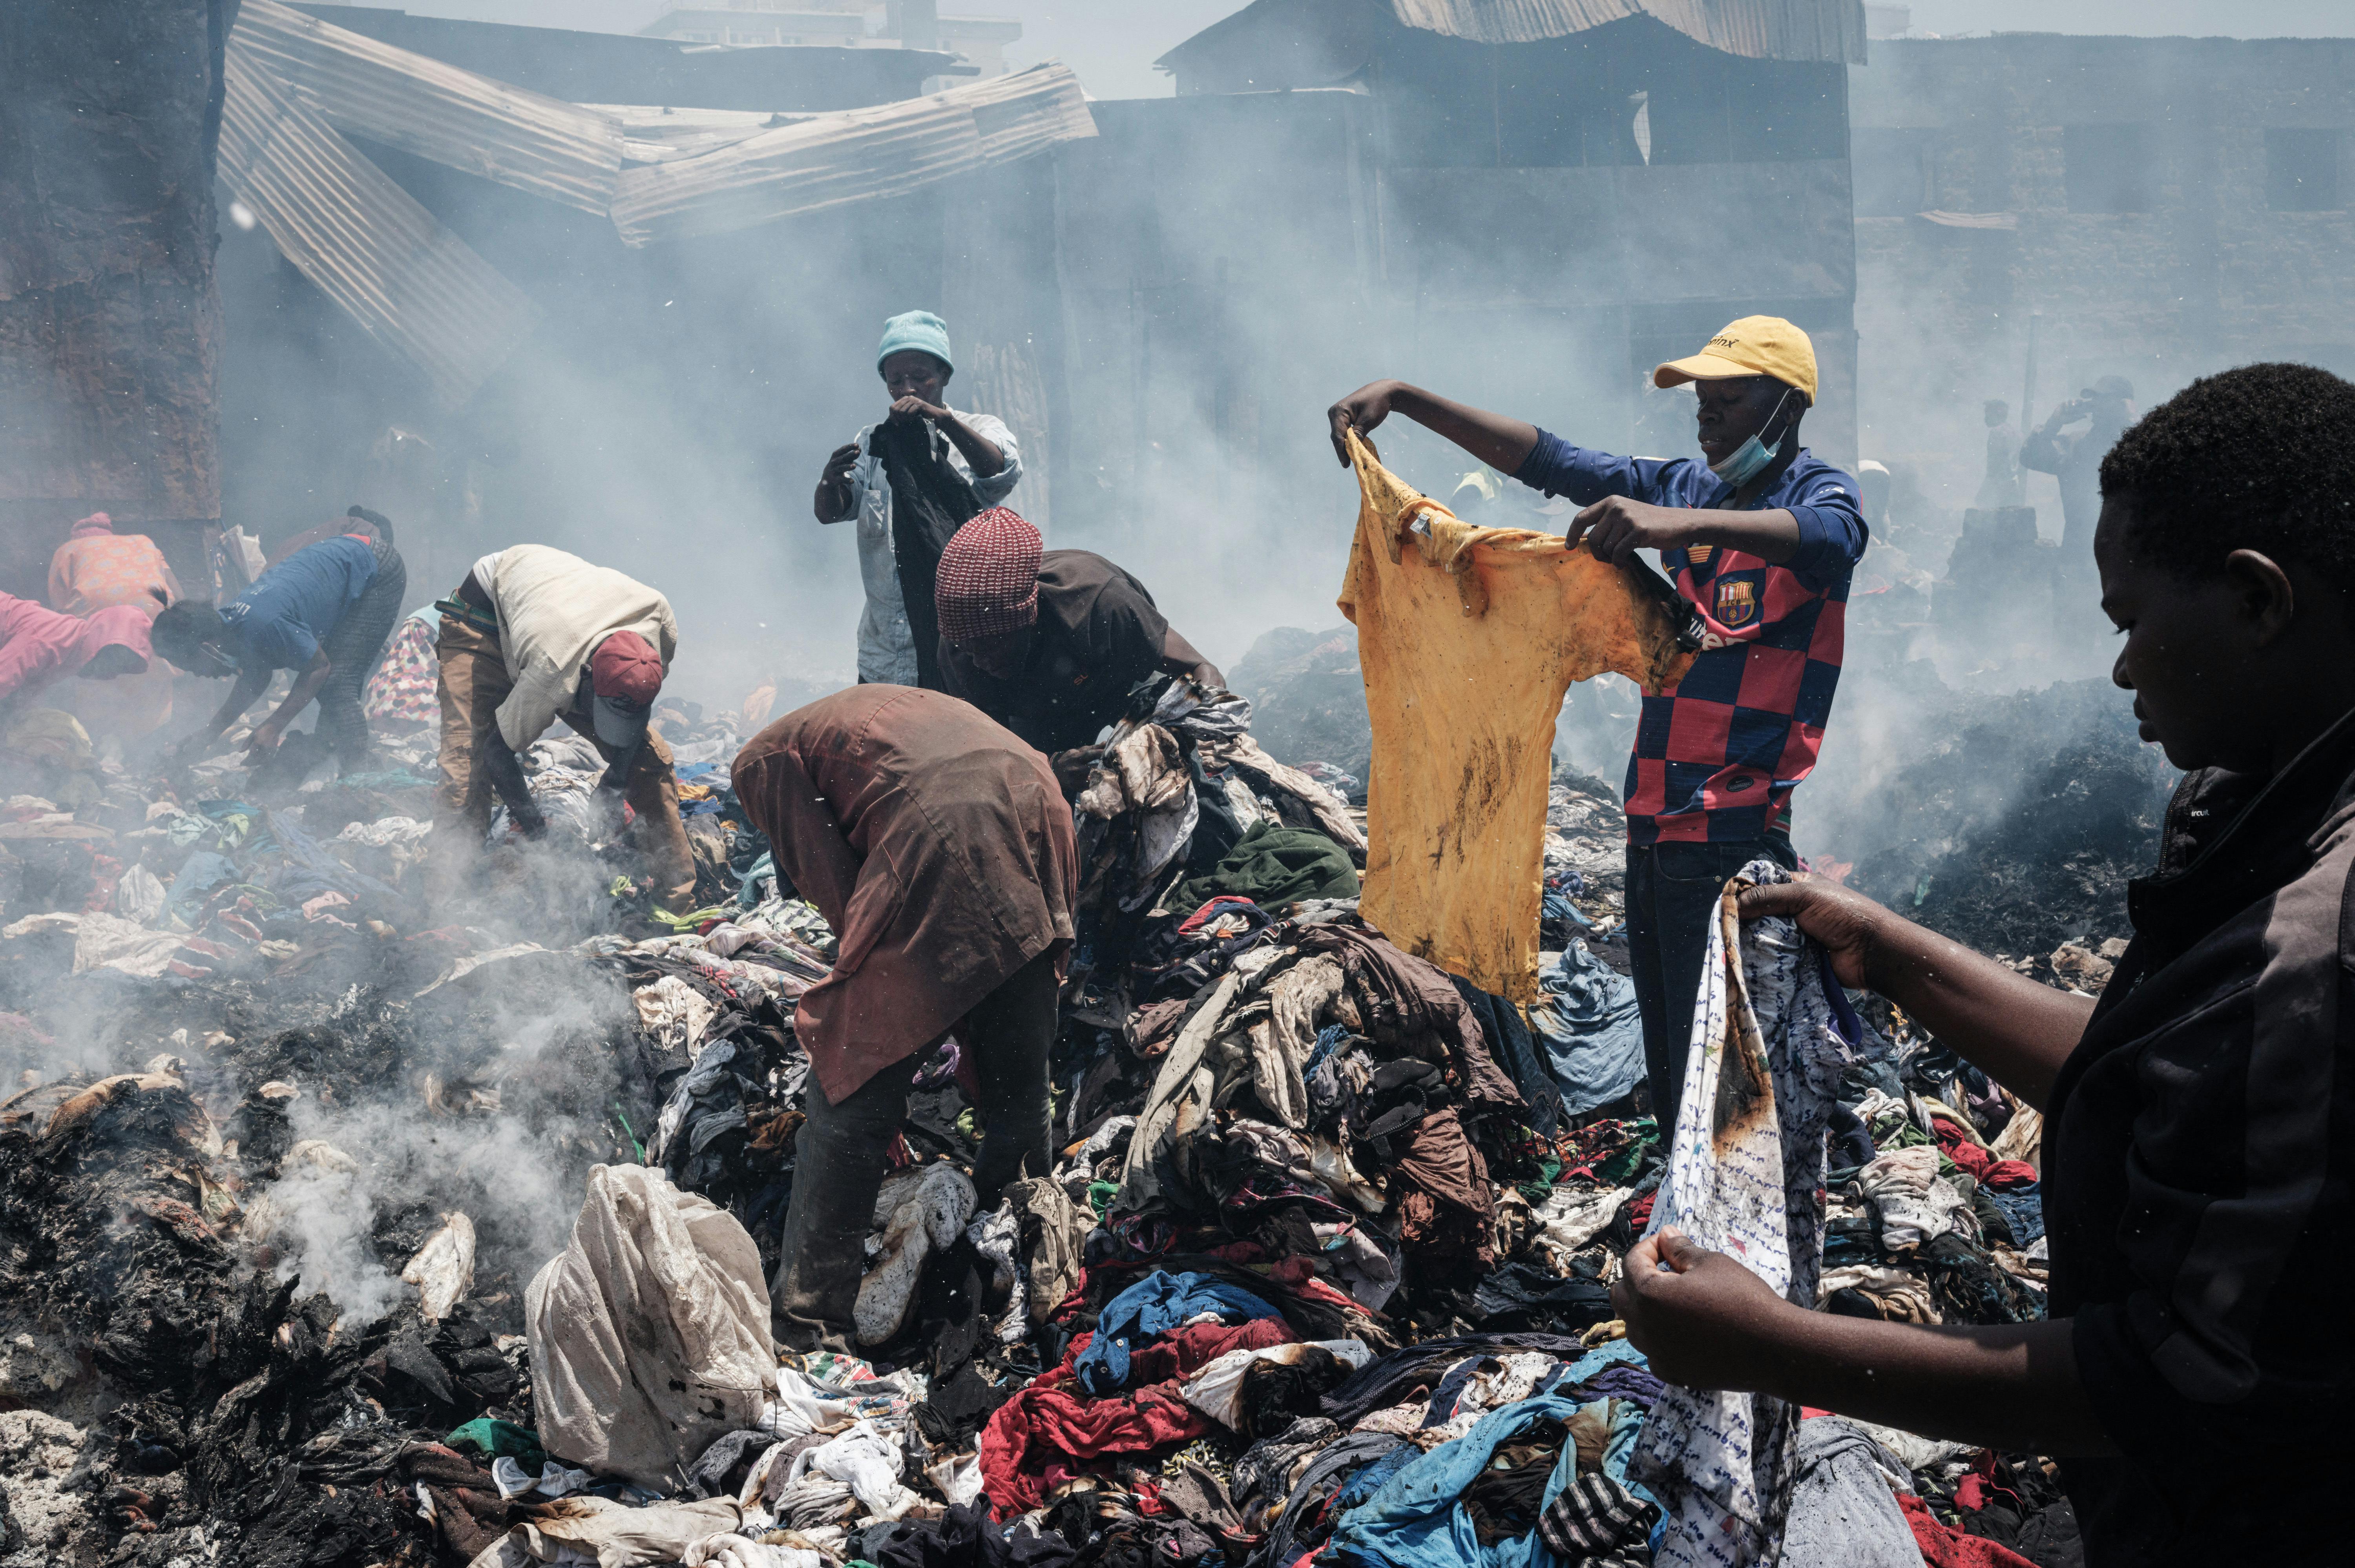 Traders scavenge clothes from debris burnt down by the fire in the early morning at Gikomba market, East Africa's largest second hand clothing market, in Nairobi, Kenya, on November 8, 2021. A court has ordered a part of the market to be evicted to build a health centre but many traders are against the decision, according to residents. Yasuyoshi CHIBA / AFP